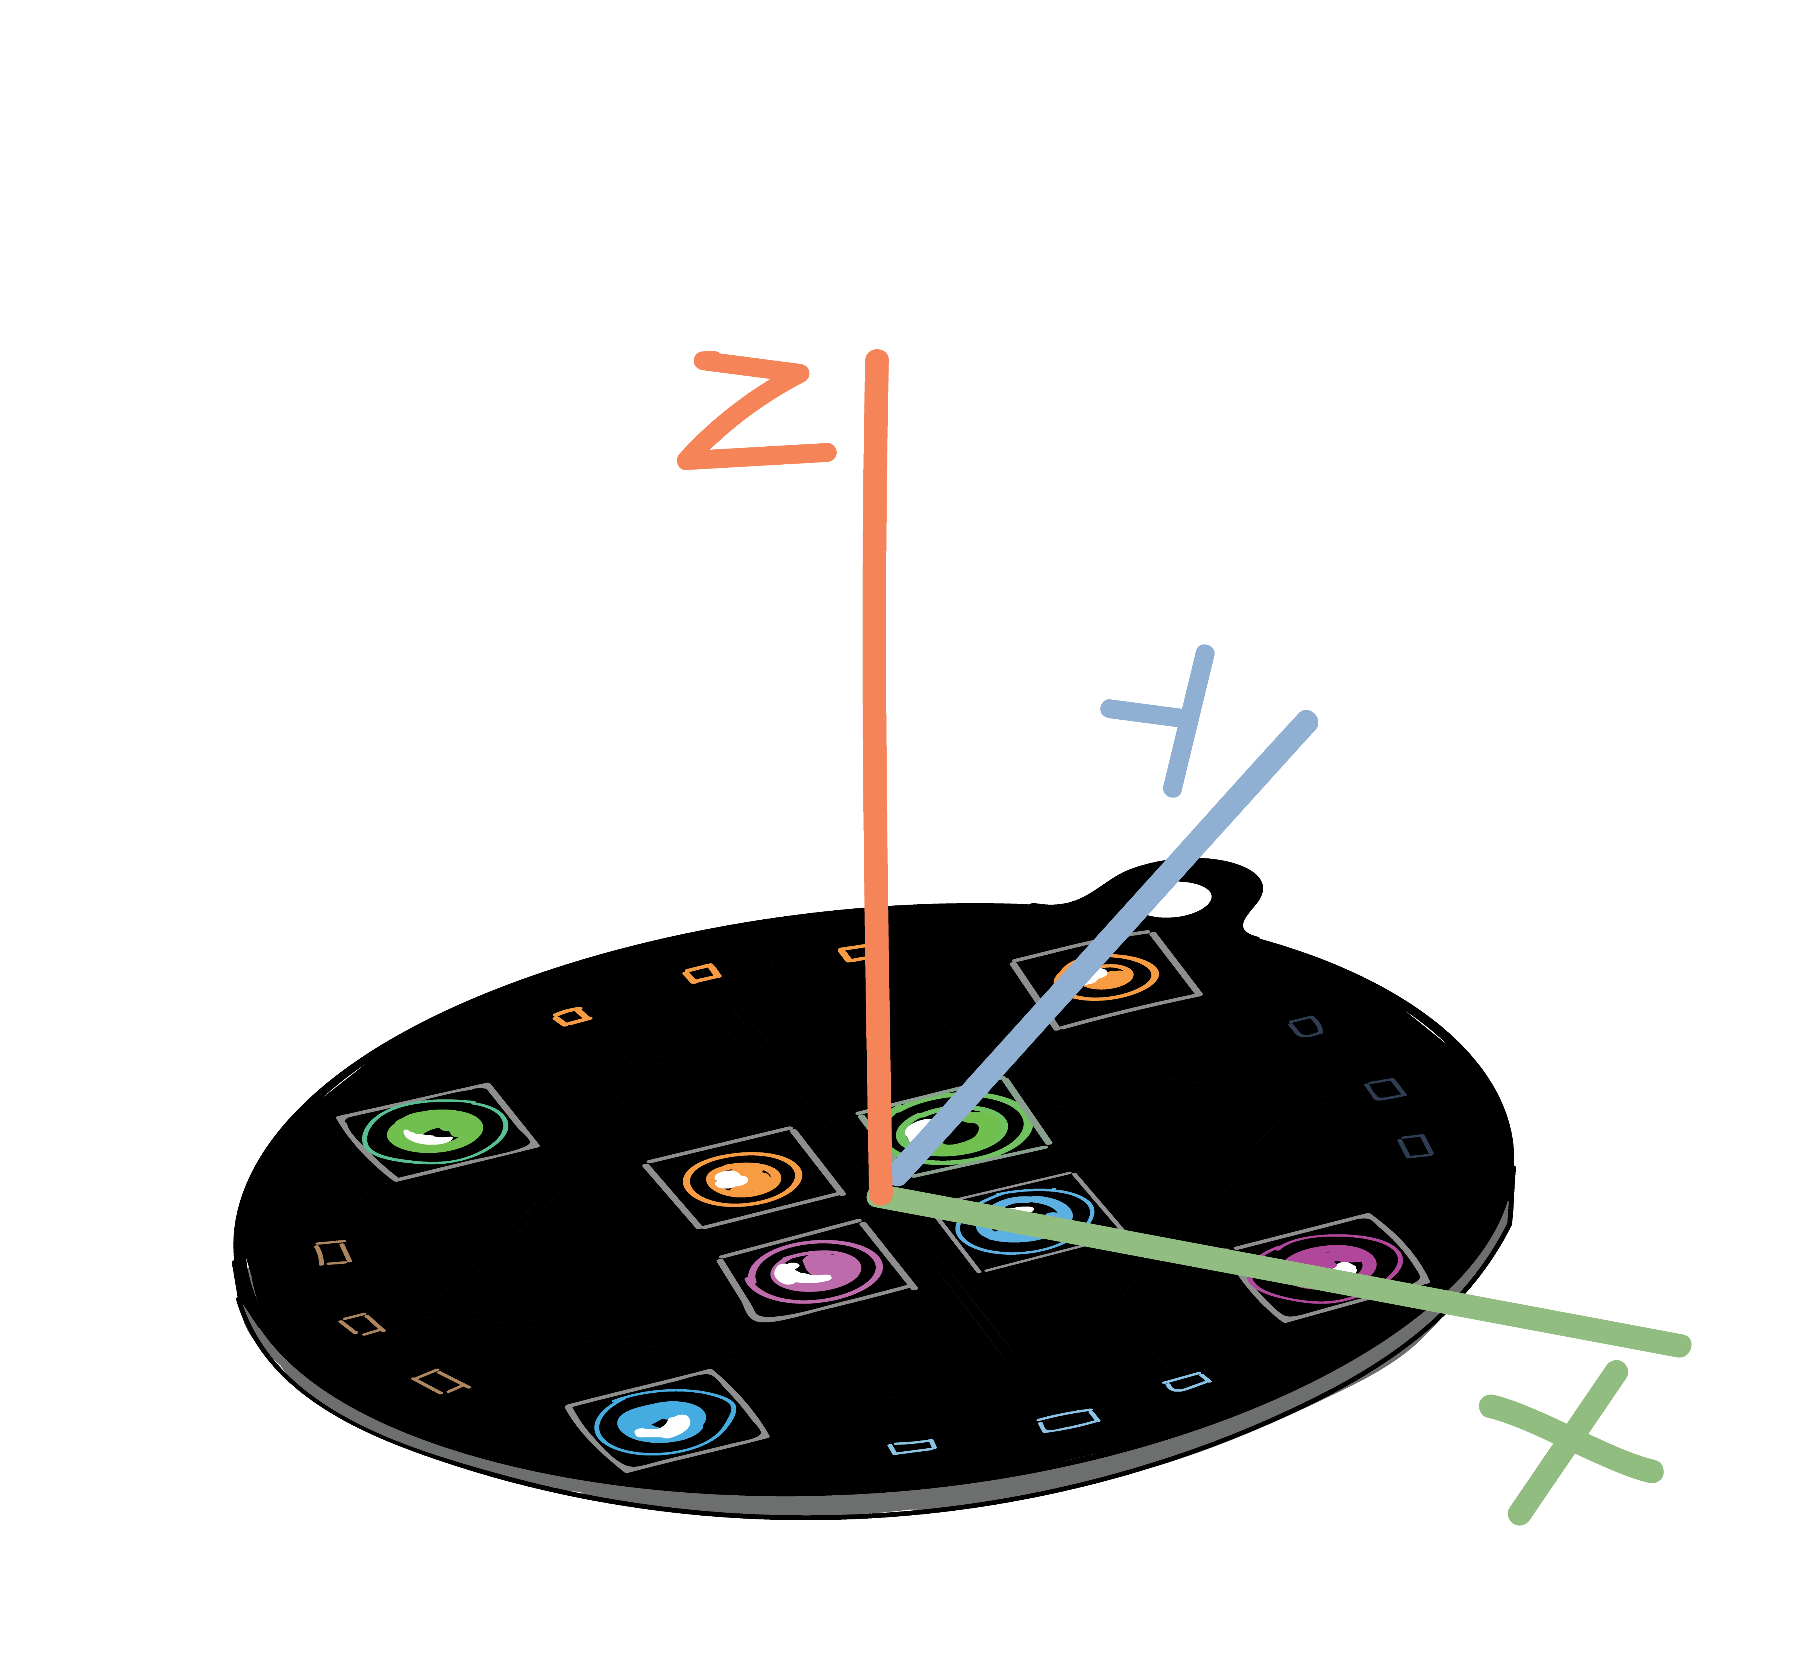 This picture demonstrates the three axes that the SpinWheel can detect rotation around. We’ll dive into what this means more in the rest of the lesson! image credit Mariya Krastanova